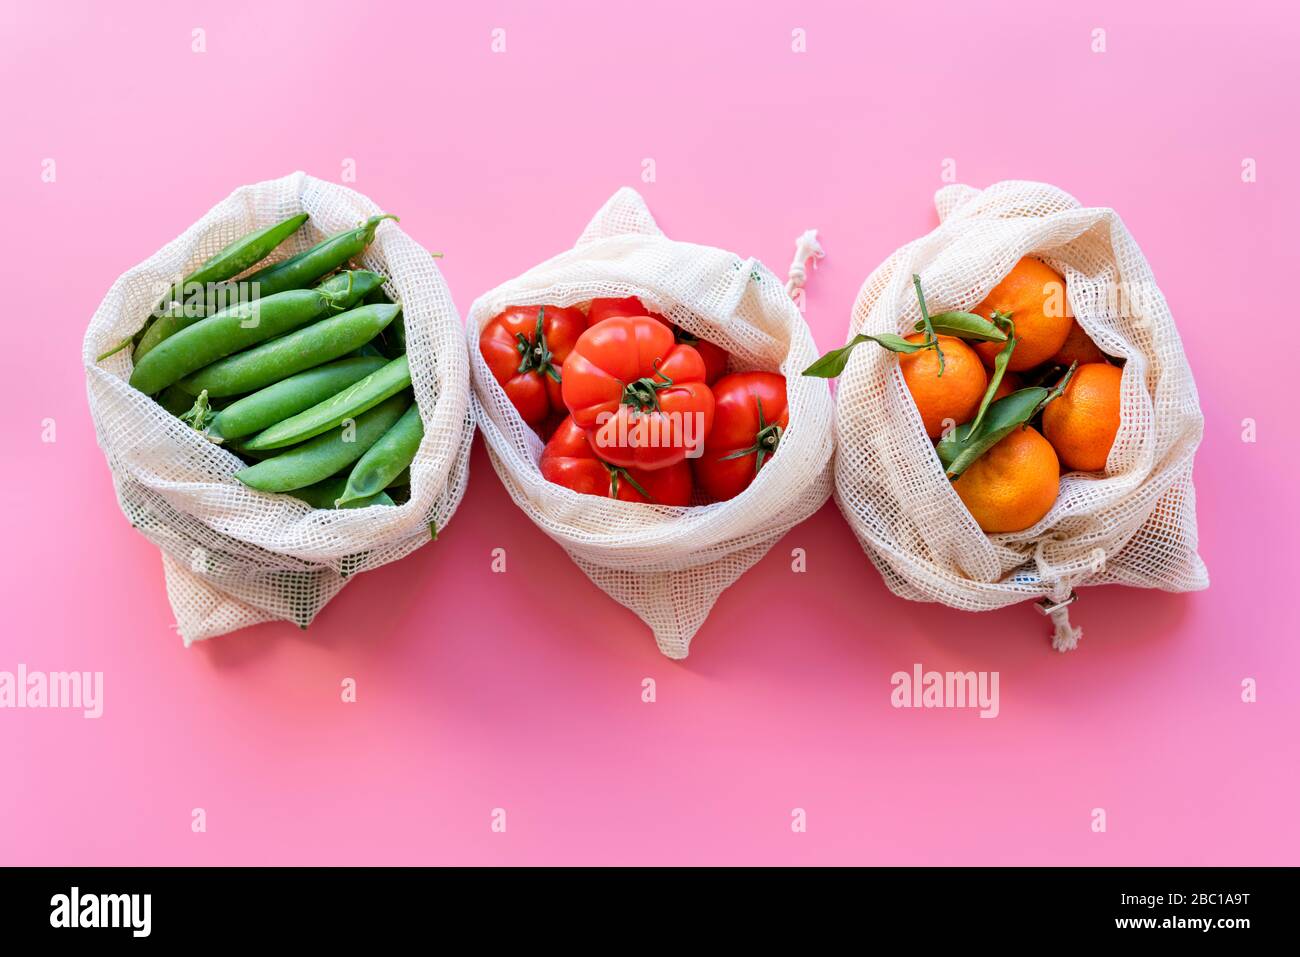 Eco-friendly reusable mesh bags with fresh green peas, tomatoes and clementines Stock Photo